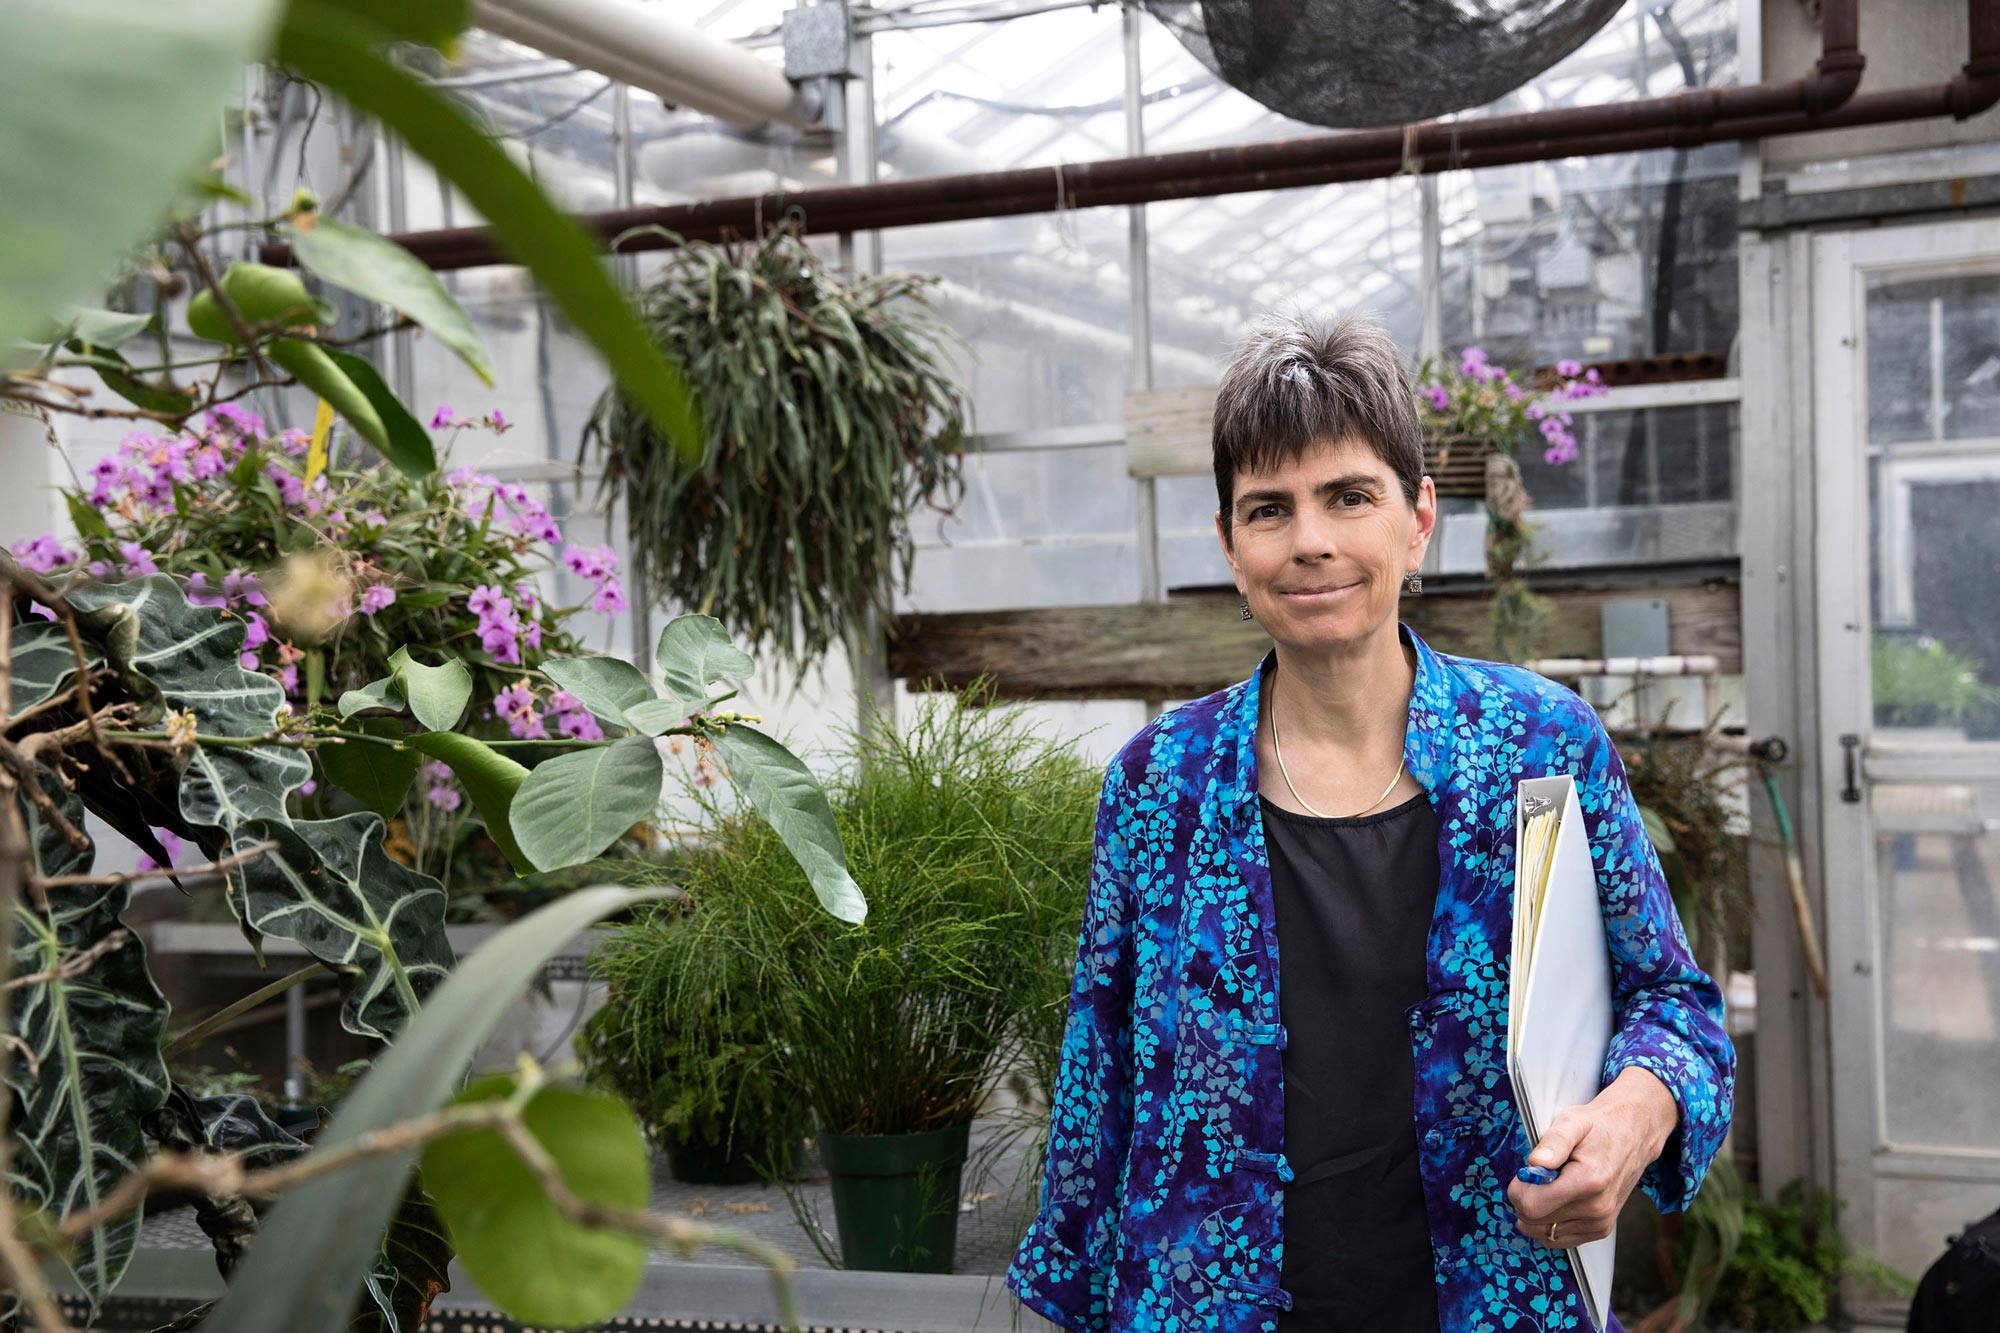 Laura Galloway, stands inside of a green house with flowers